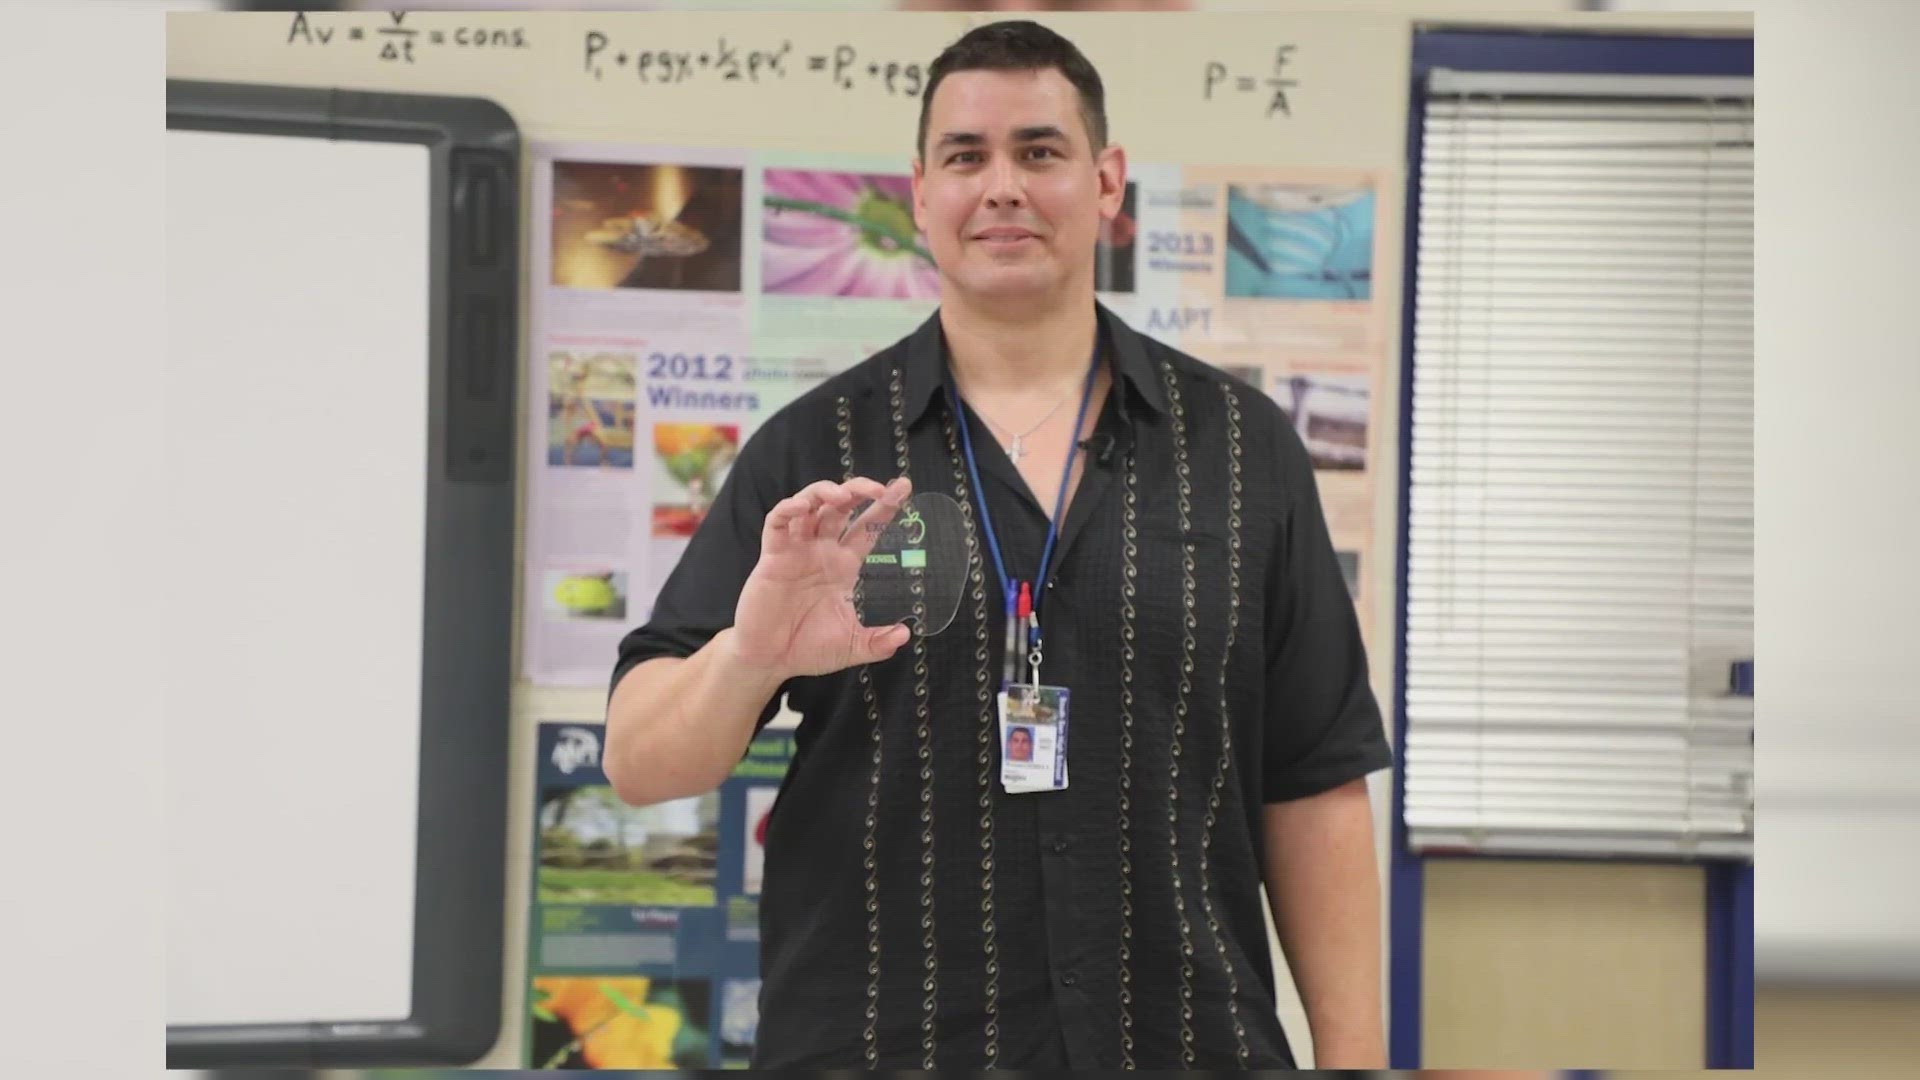 Michael Sorola’s unique way of sparking interest in the classroom, has earned him the KENS 5 EXCEL Award and $1,000 from our partner Credit Human.